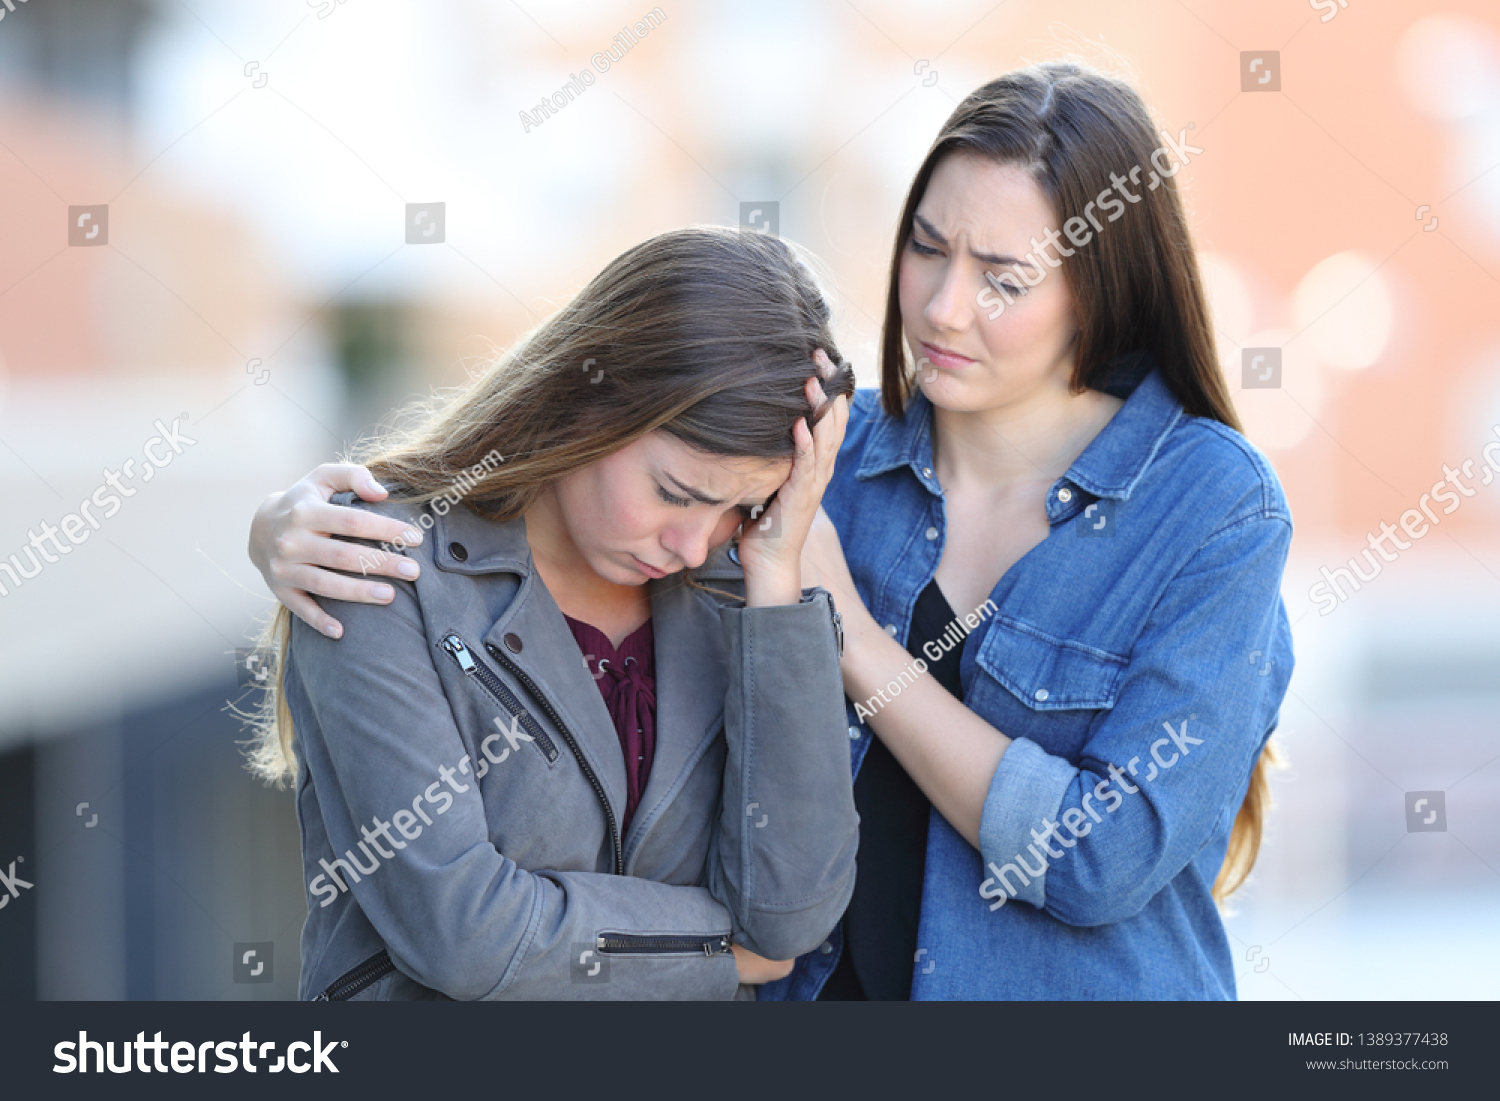 Worried woman comforting her sad friend who is complaining in the street #1389377438